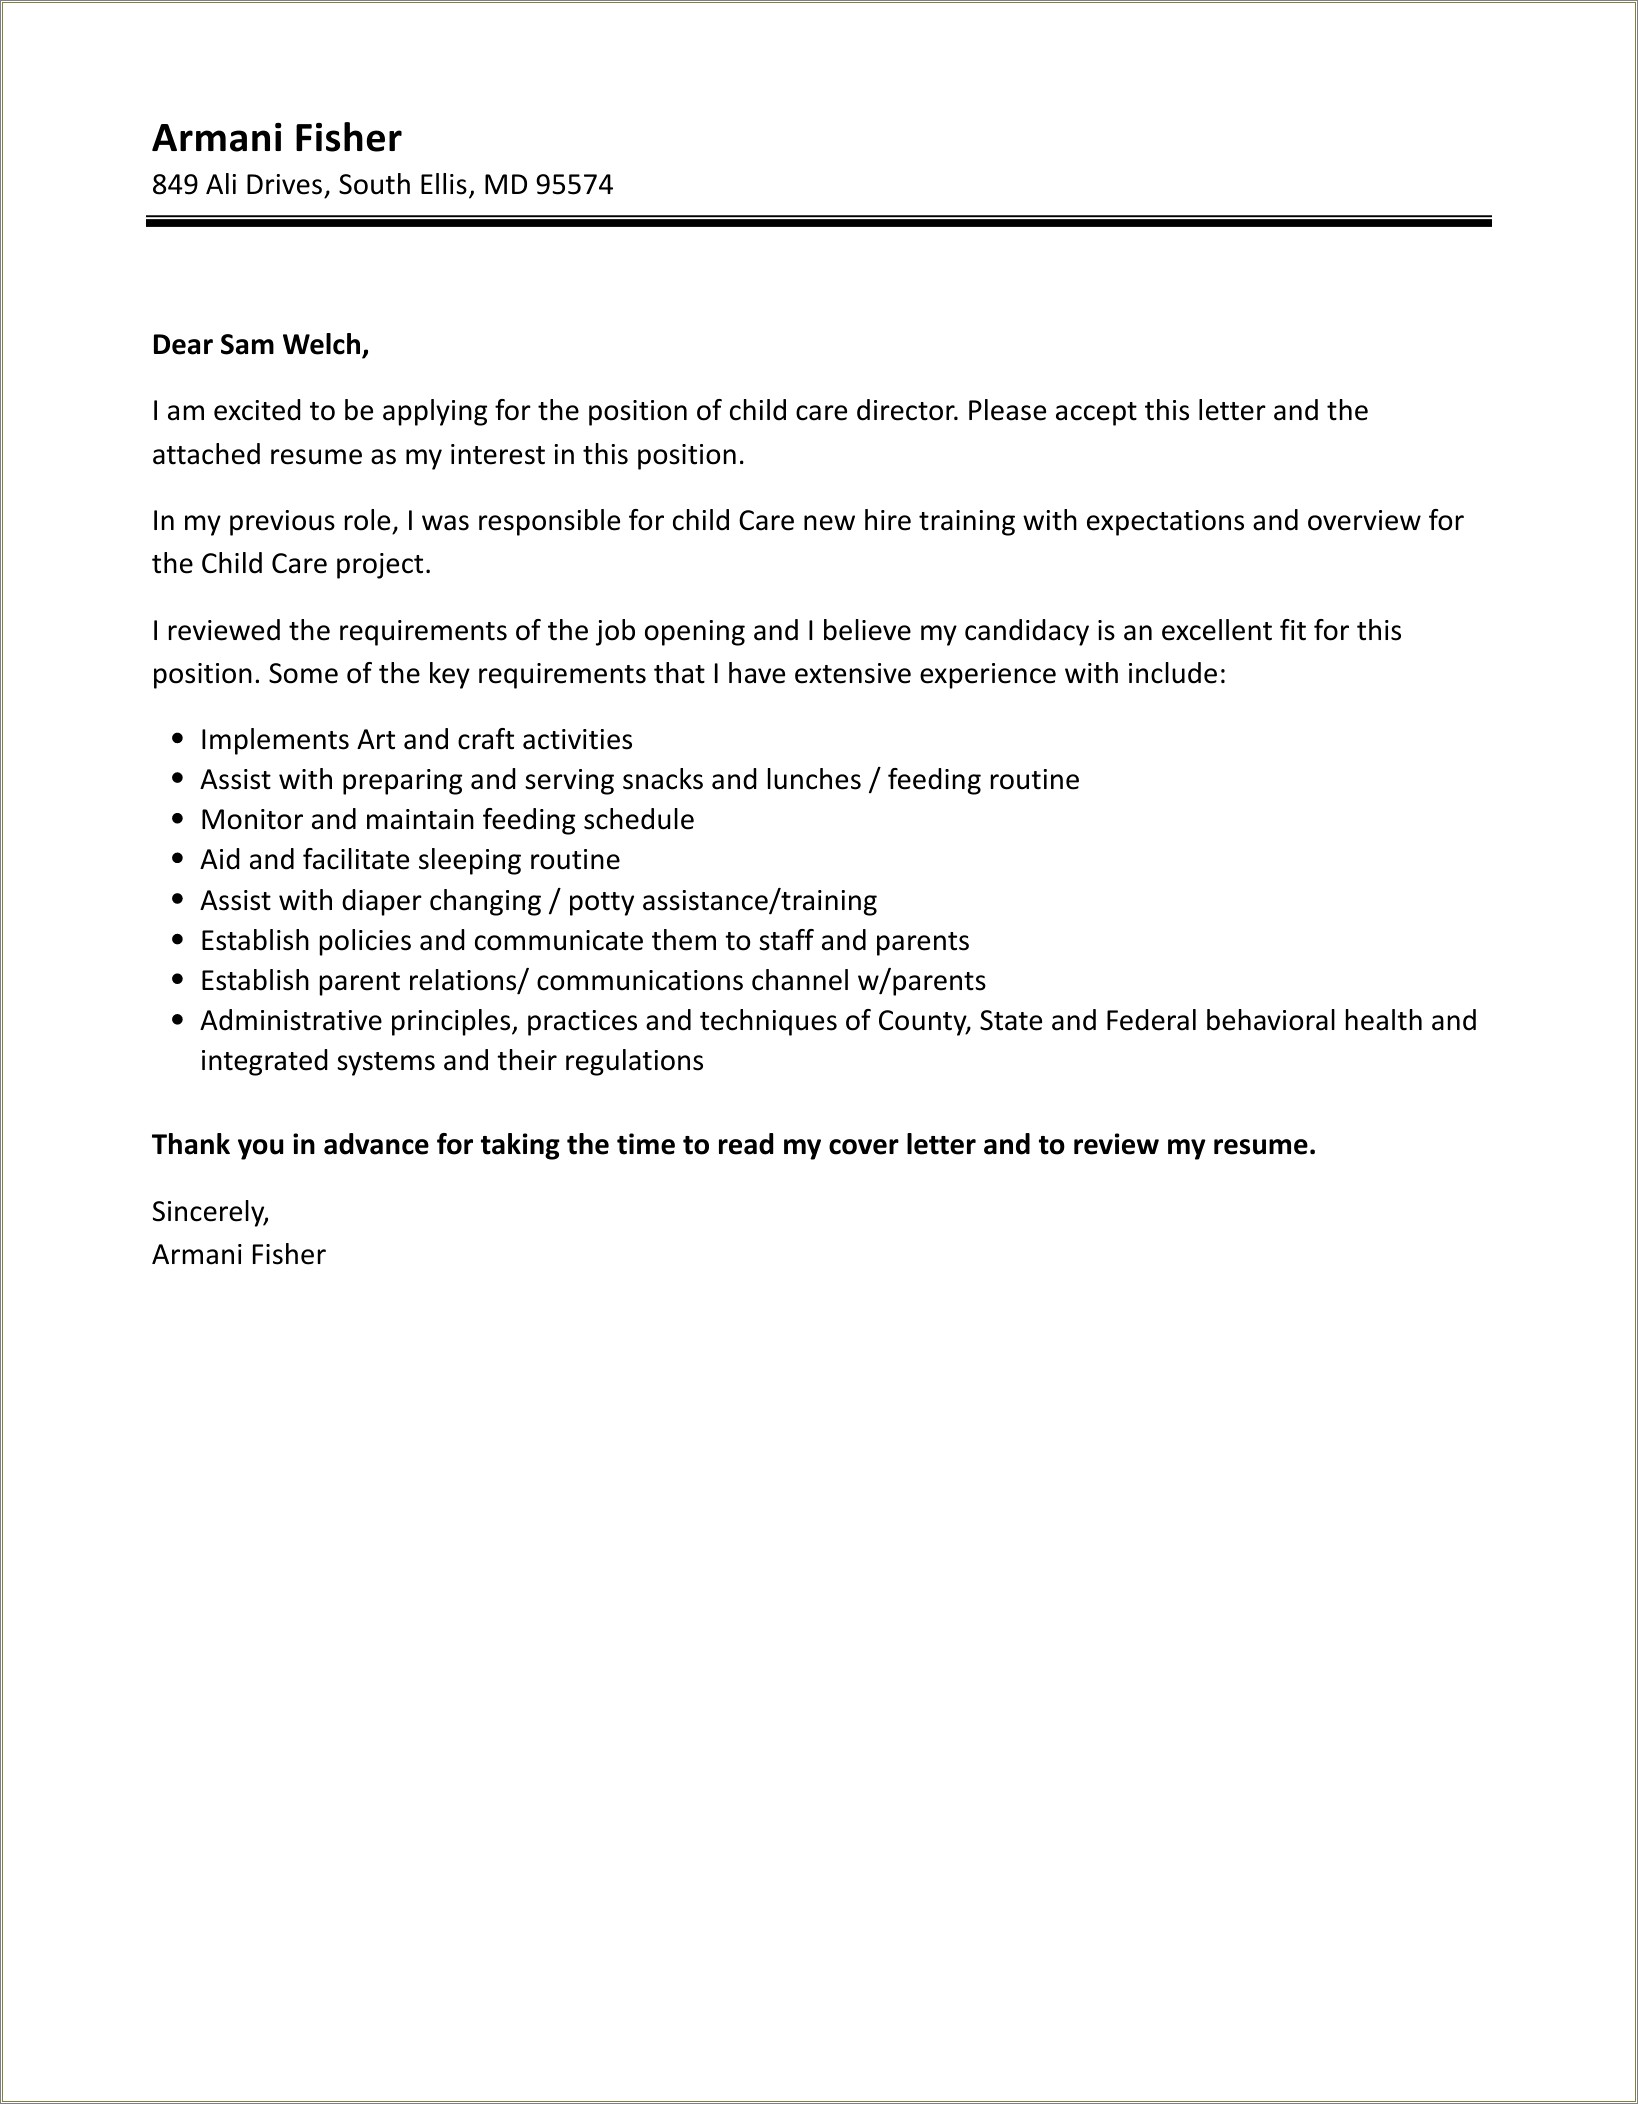 Child Care Director Resume Cover Letter